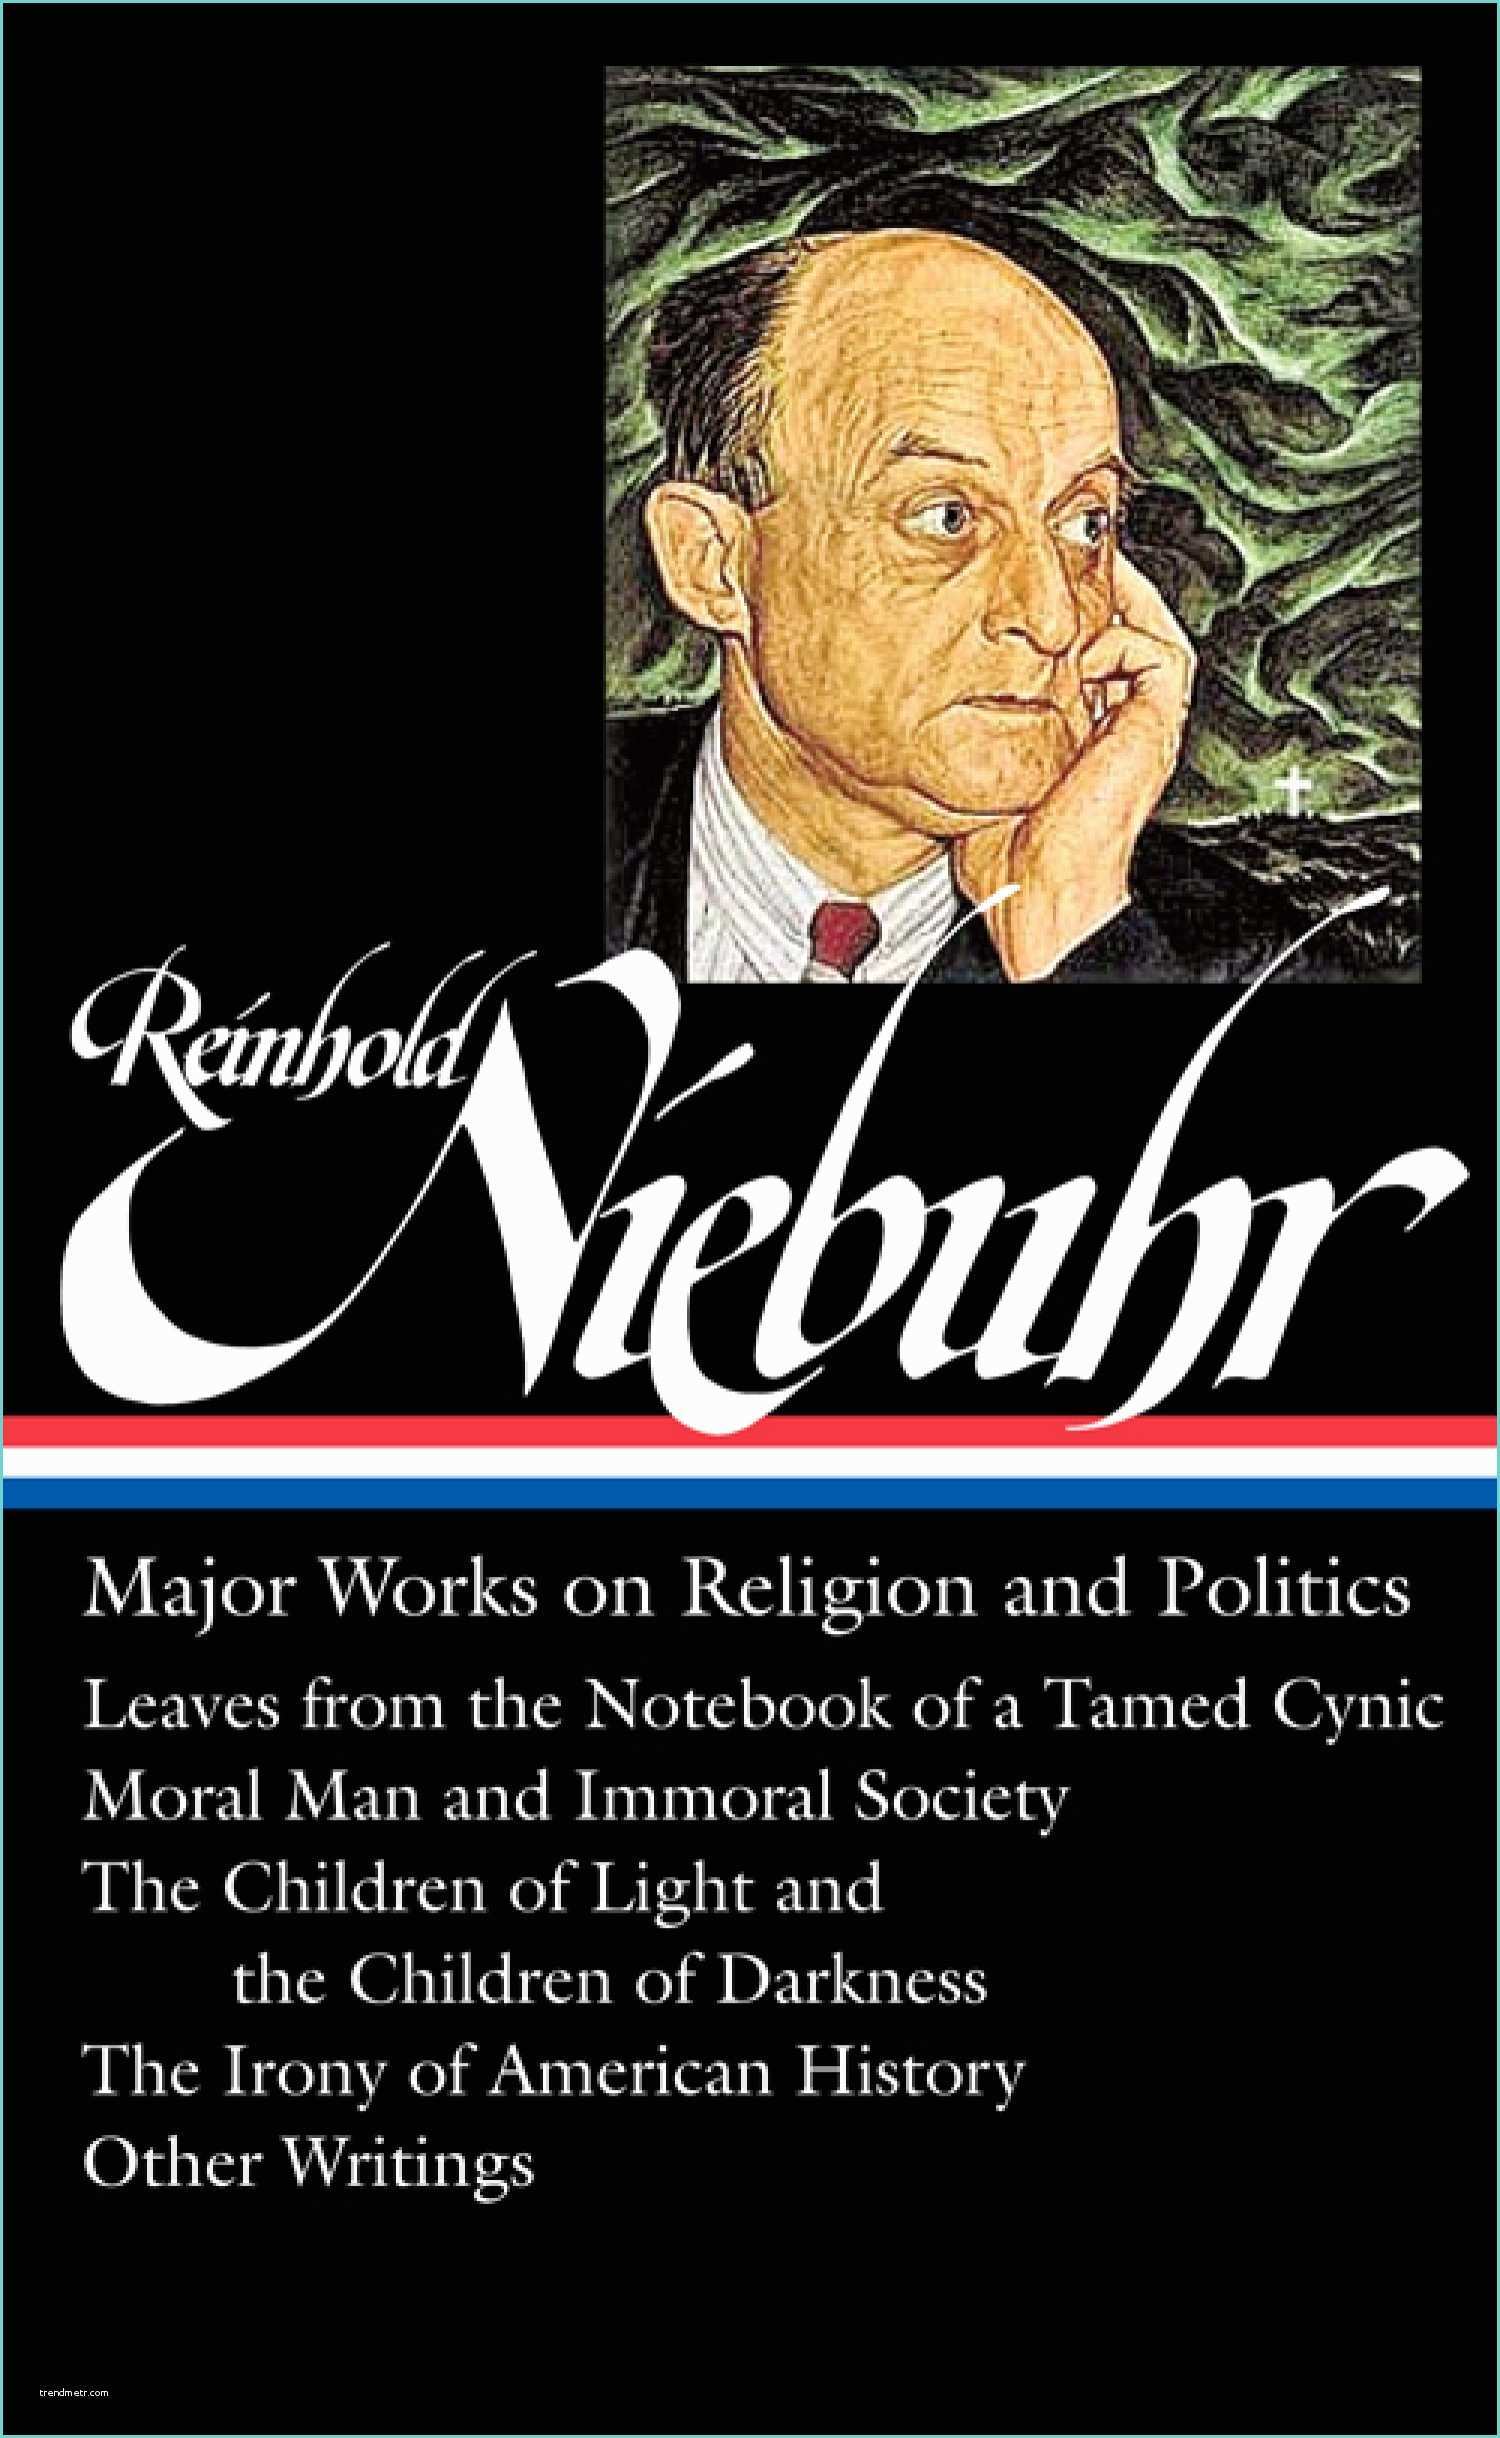 And Major Works the Reinhold Niebuhr Major Works On Religion and Politics